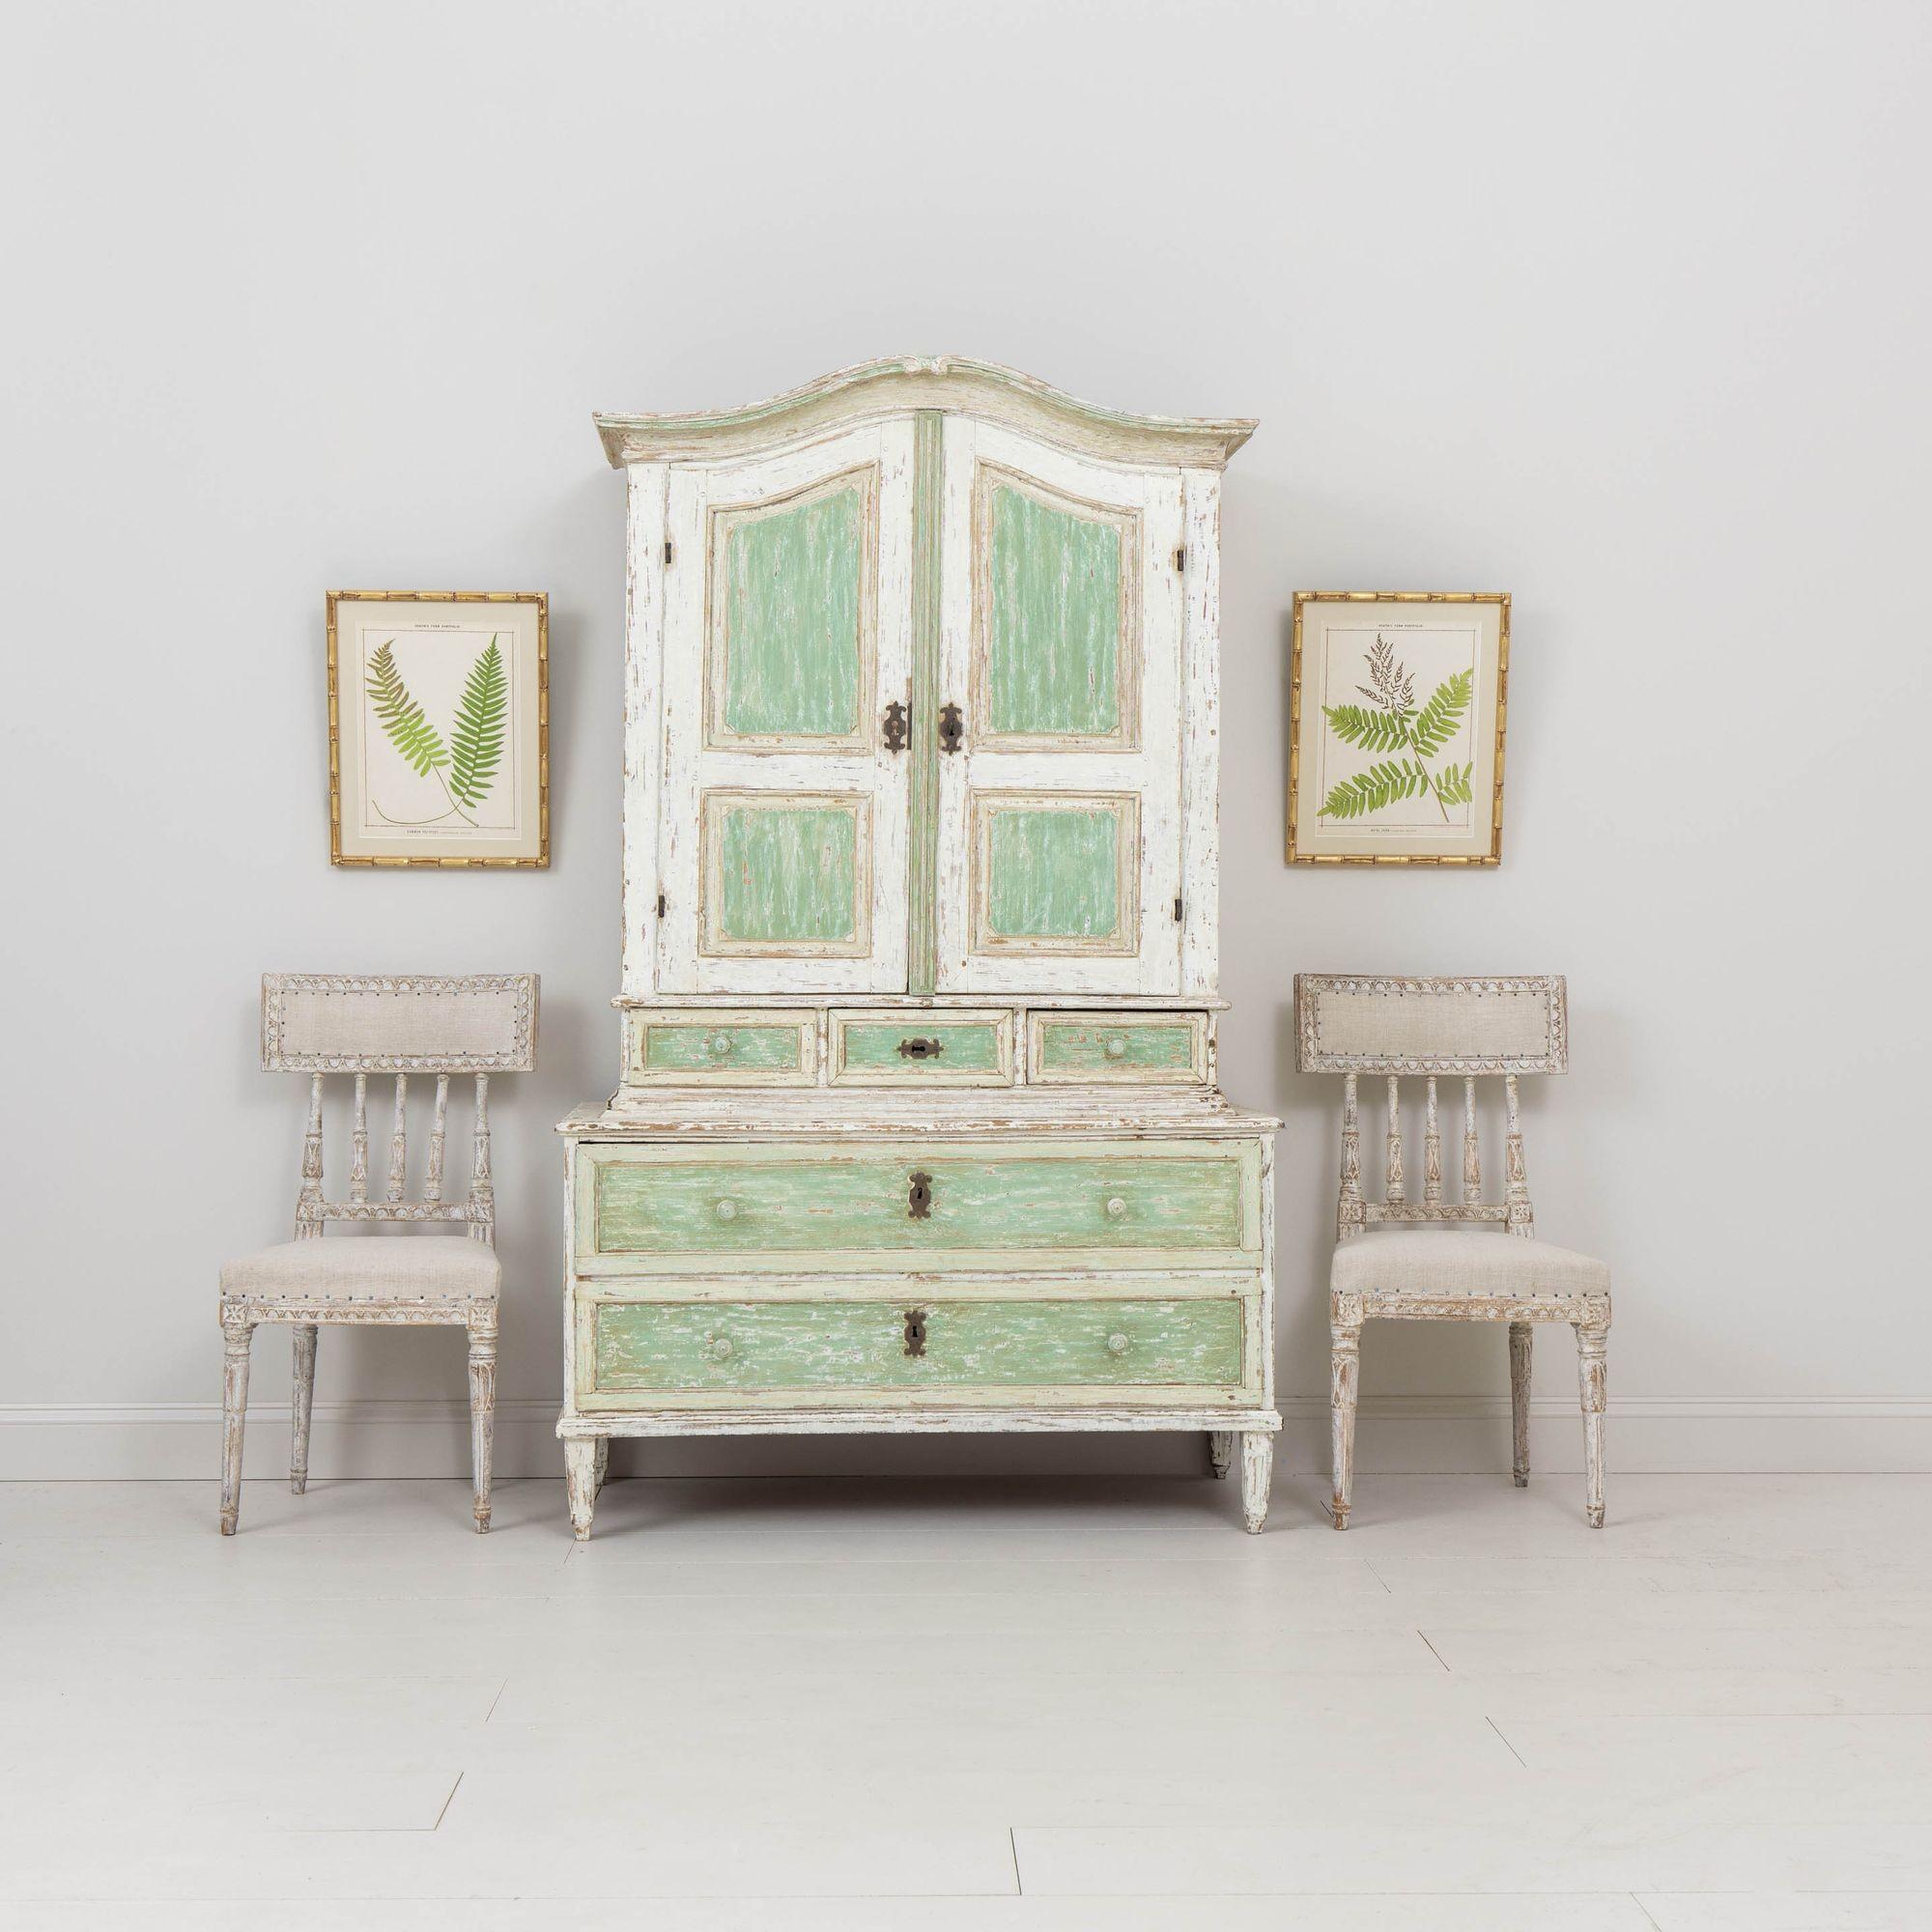 A beautiful two-part cabinet with shaped cornice raised on square tapered legs from the 18th century. This charming cabinet has been hand-scraped to the original green paint. Lovely proportions with plenty of storage space. Circa 1780. The upper